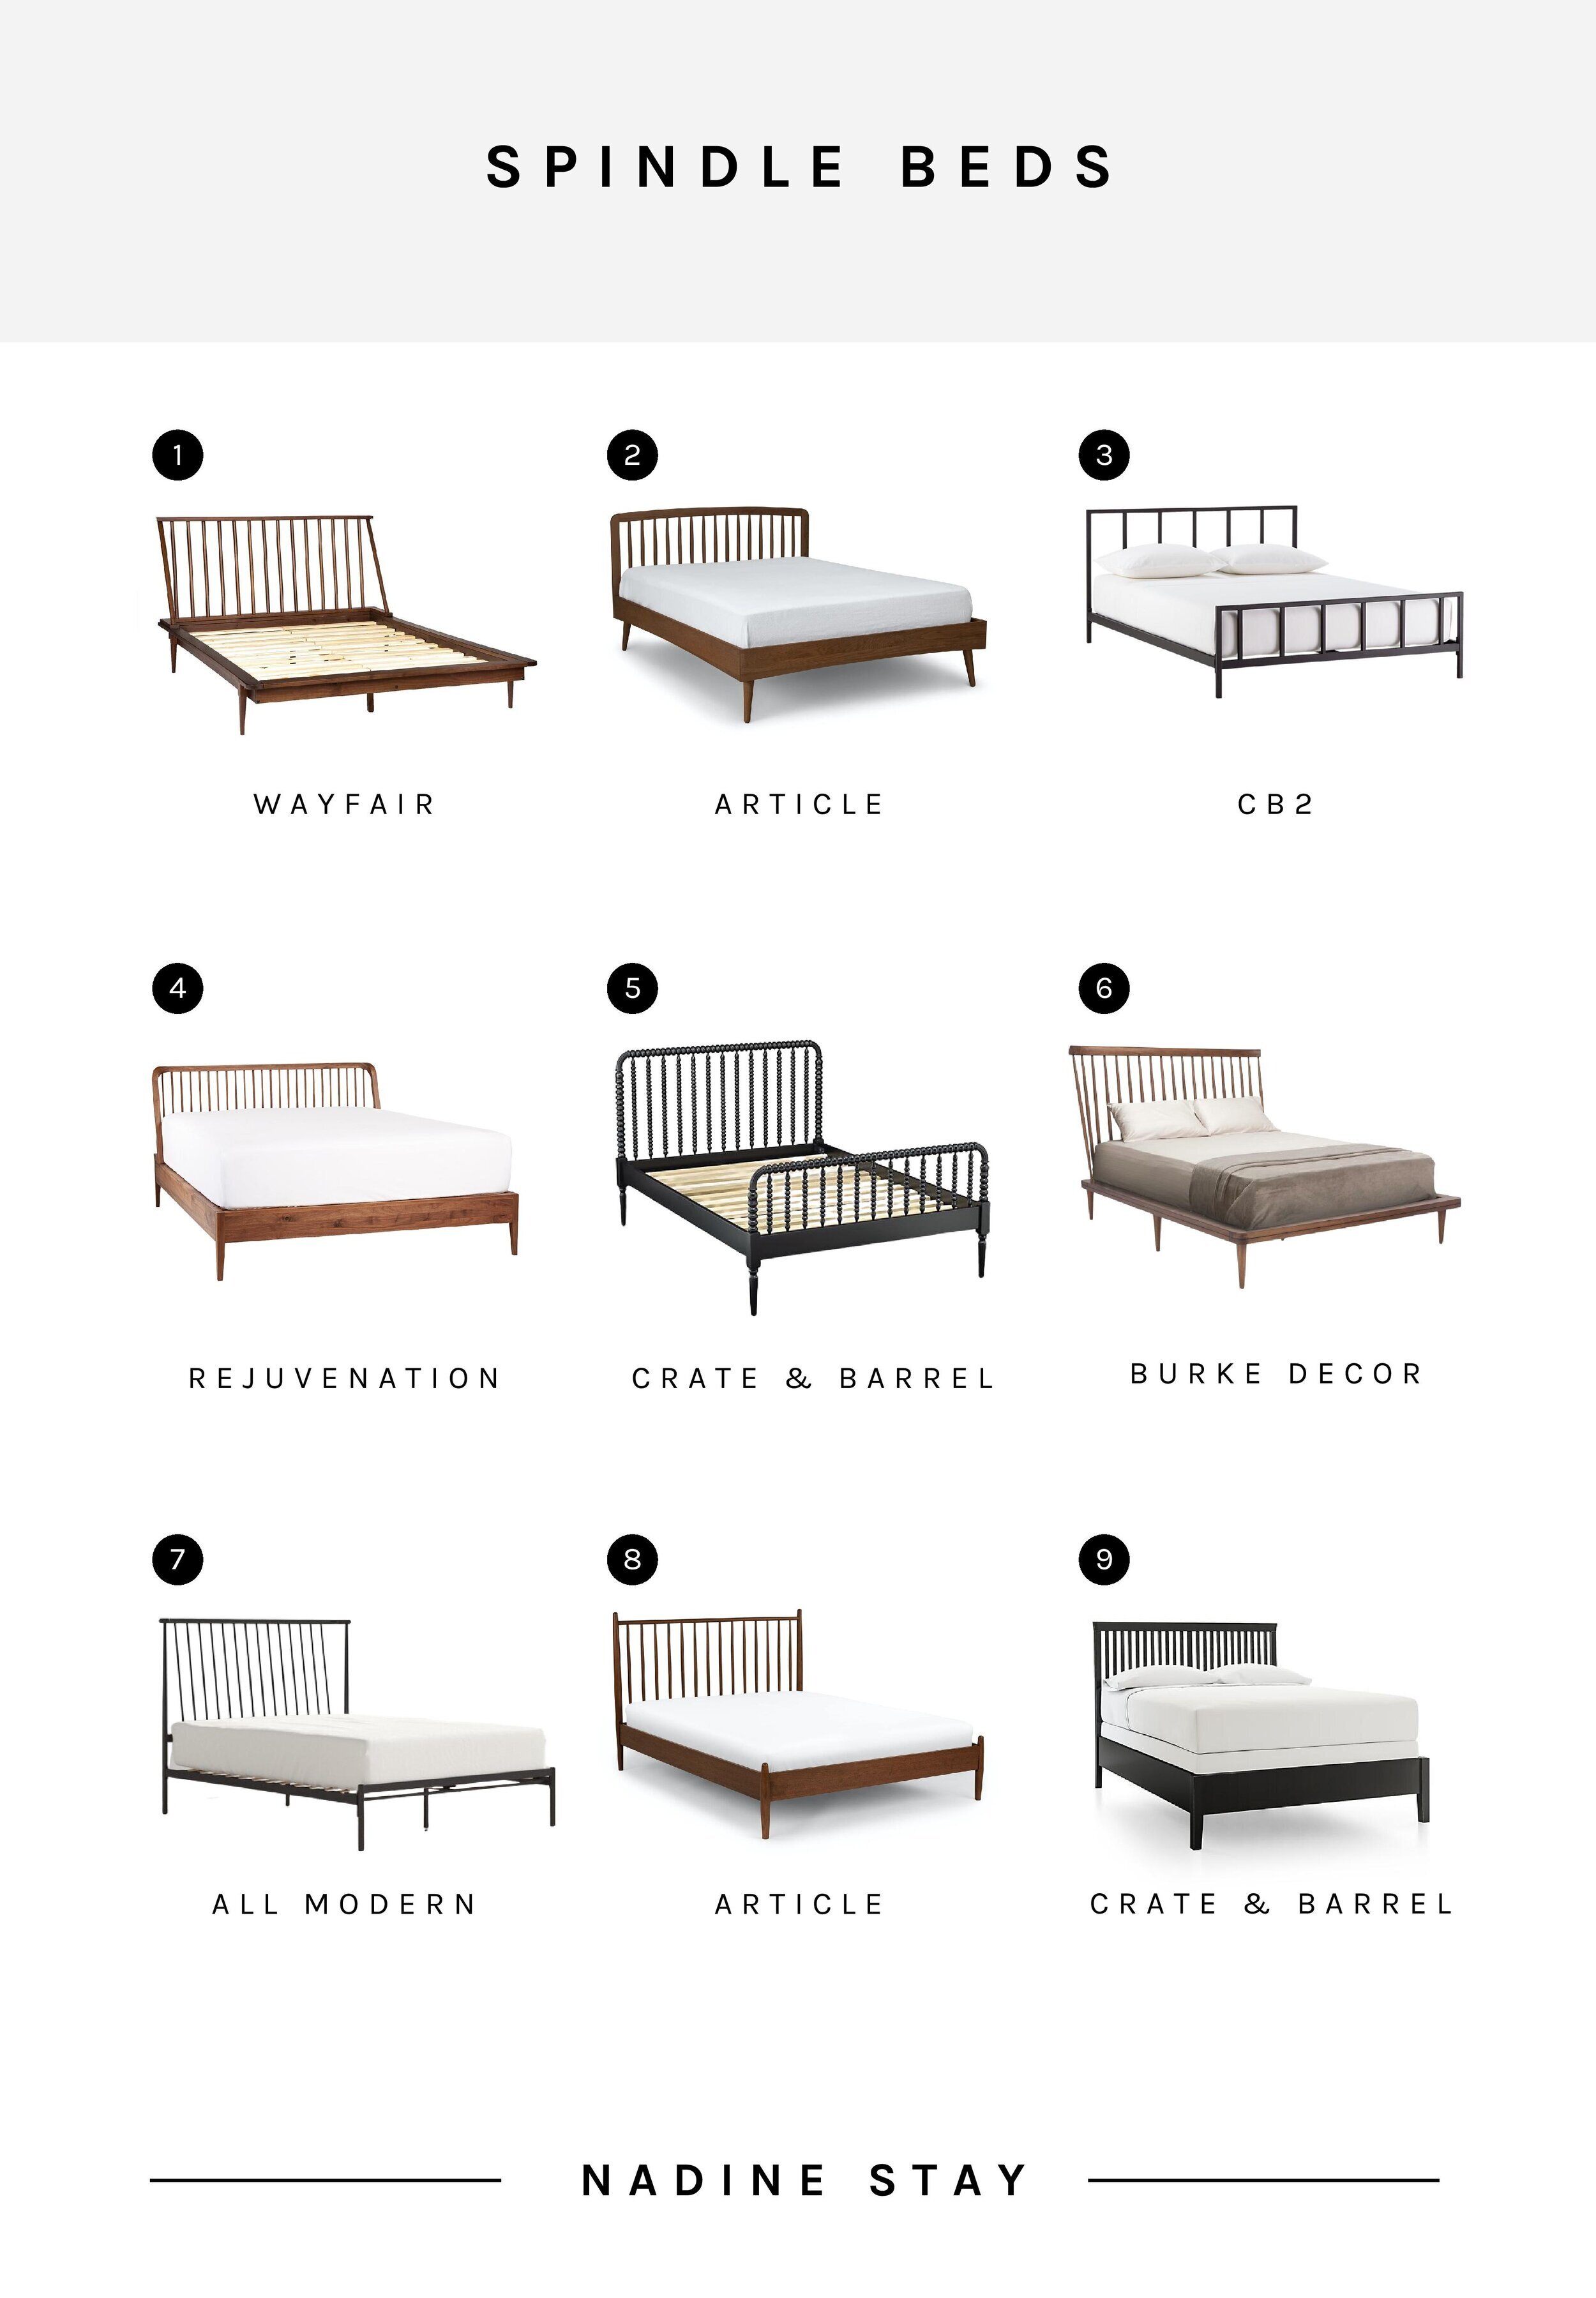 Our Bedroom "As Is" and 9 spindle bed alternatives - modern traditional bedroom decor and platform bed inspiration. | Nadine Stay